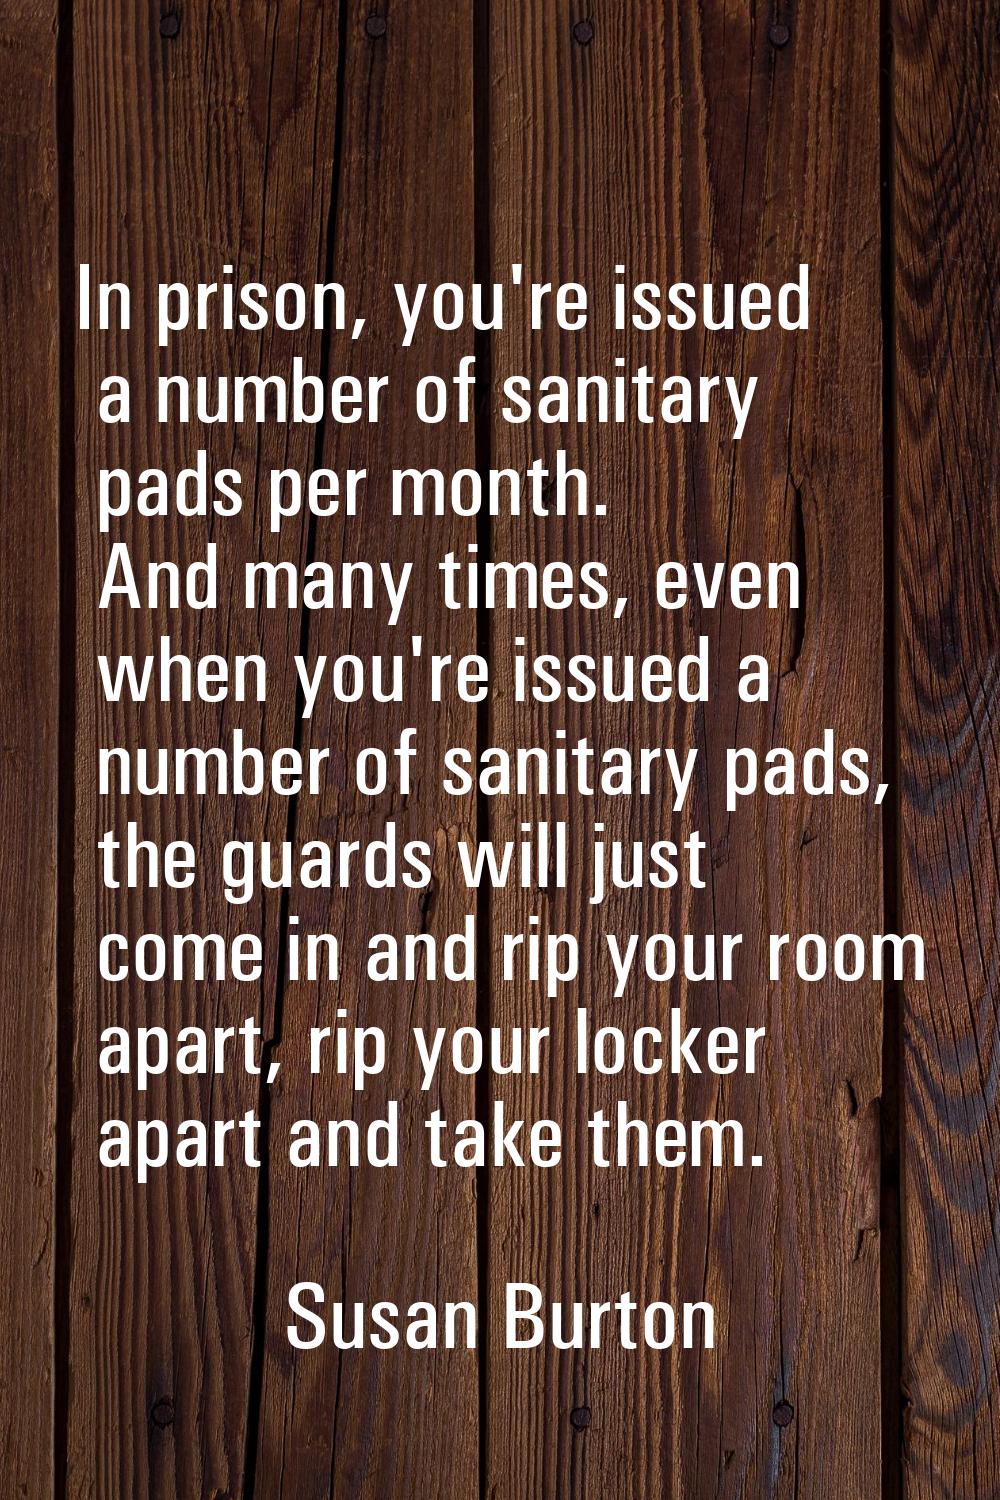 In prison, you're issued a number of sanitary pads per month. And many times, even when you're issu